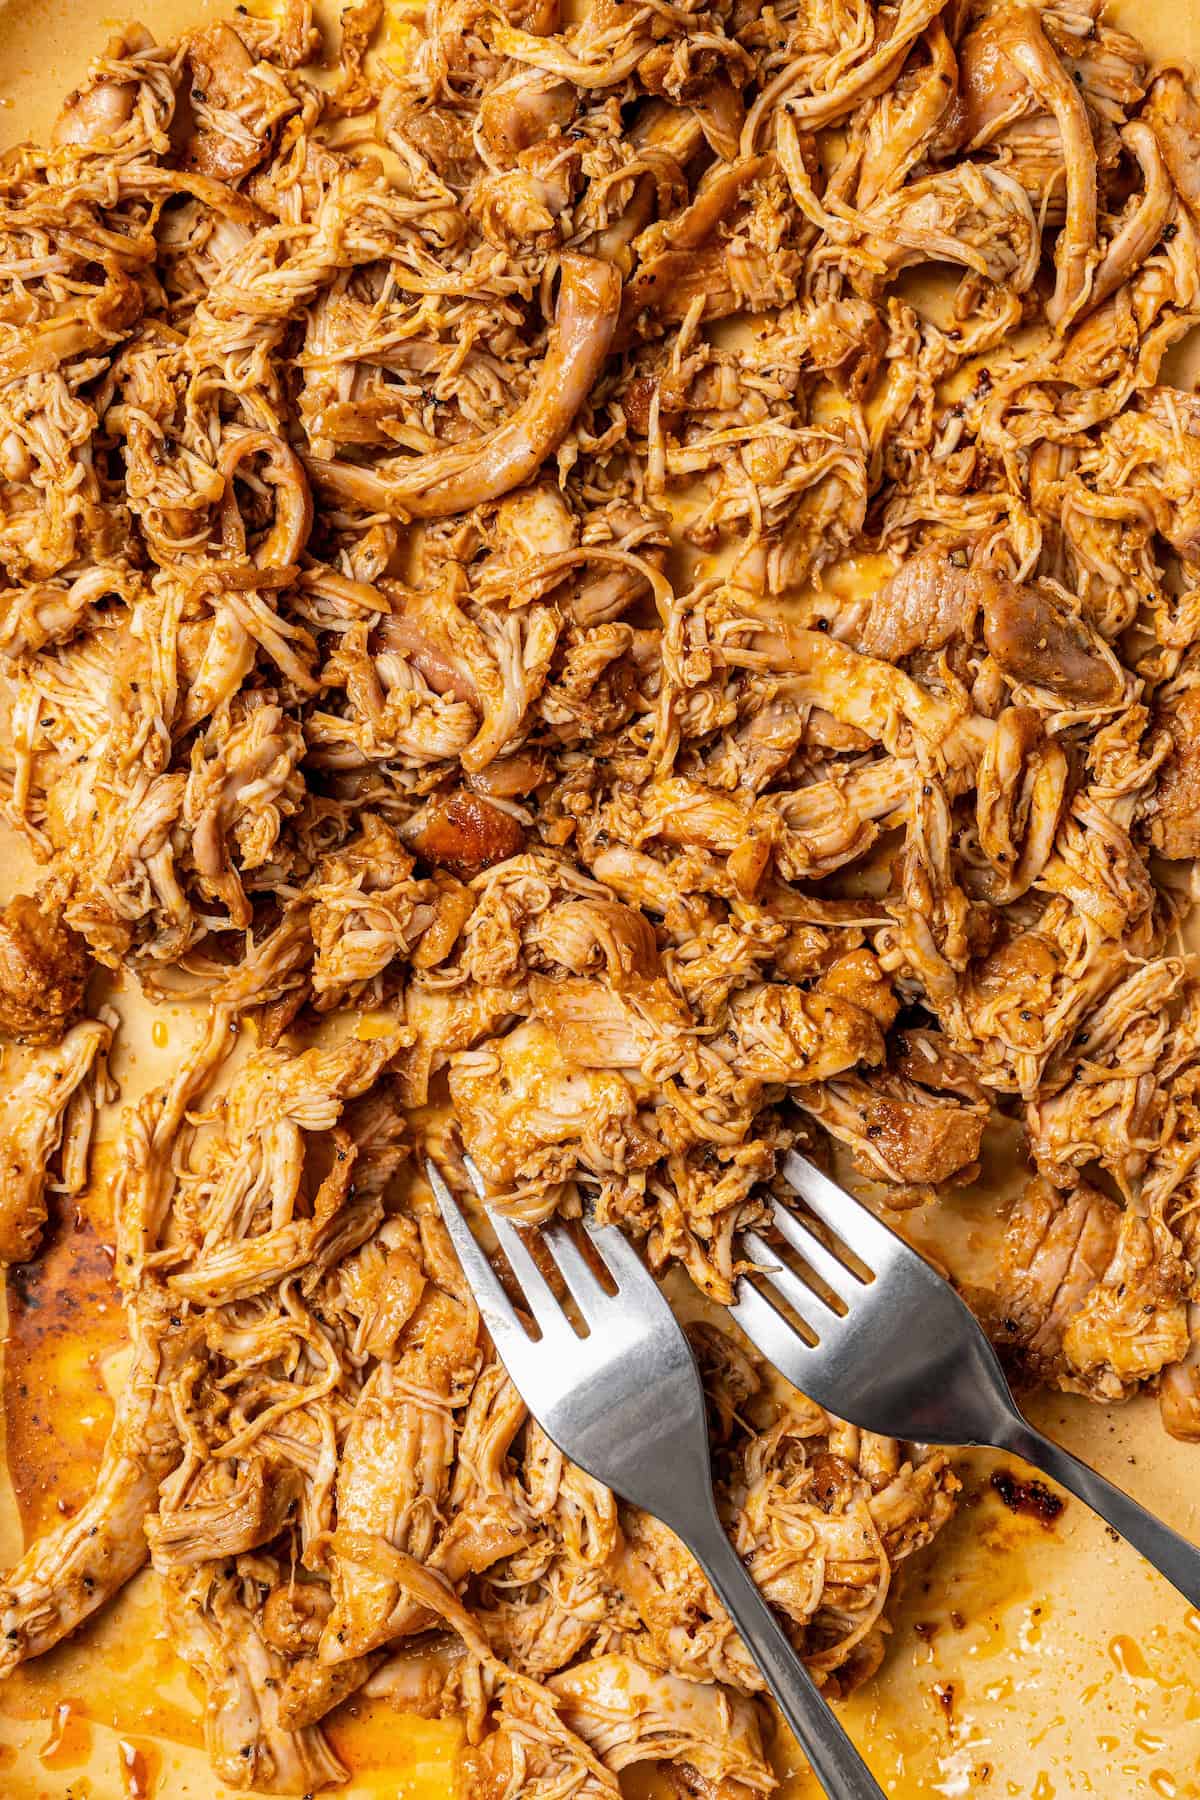 Shredded chicken on a wooden cutting board with two forks.